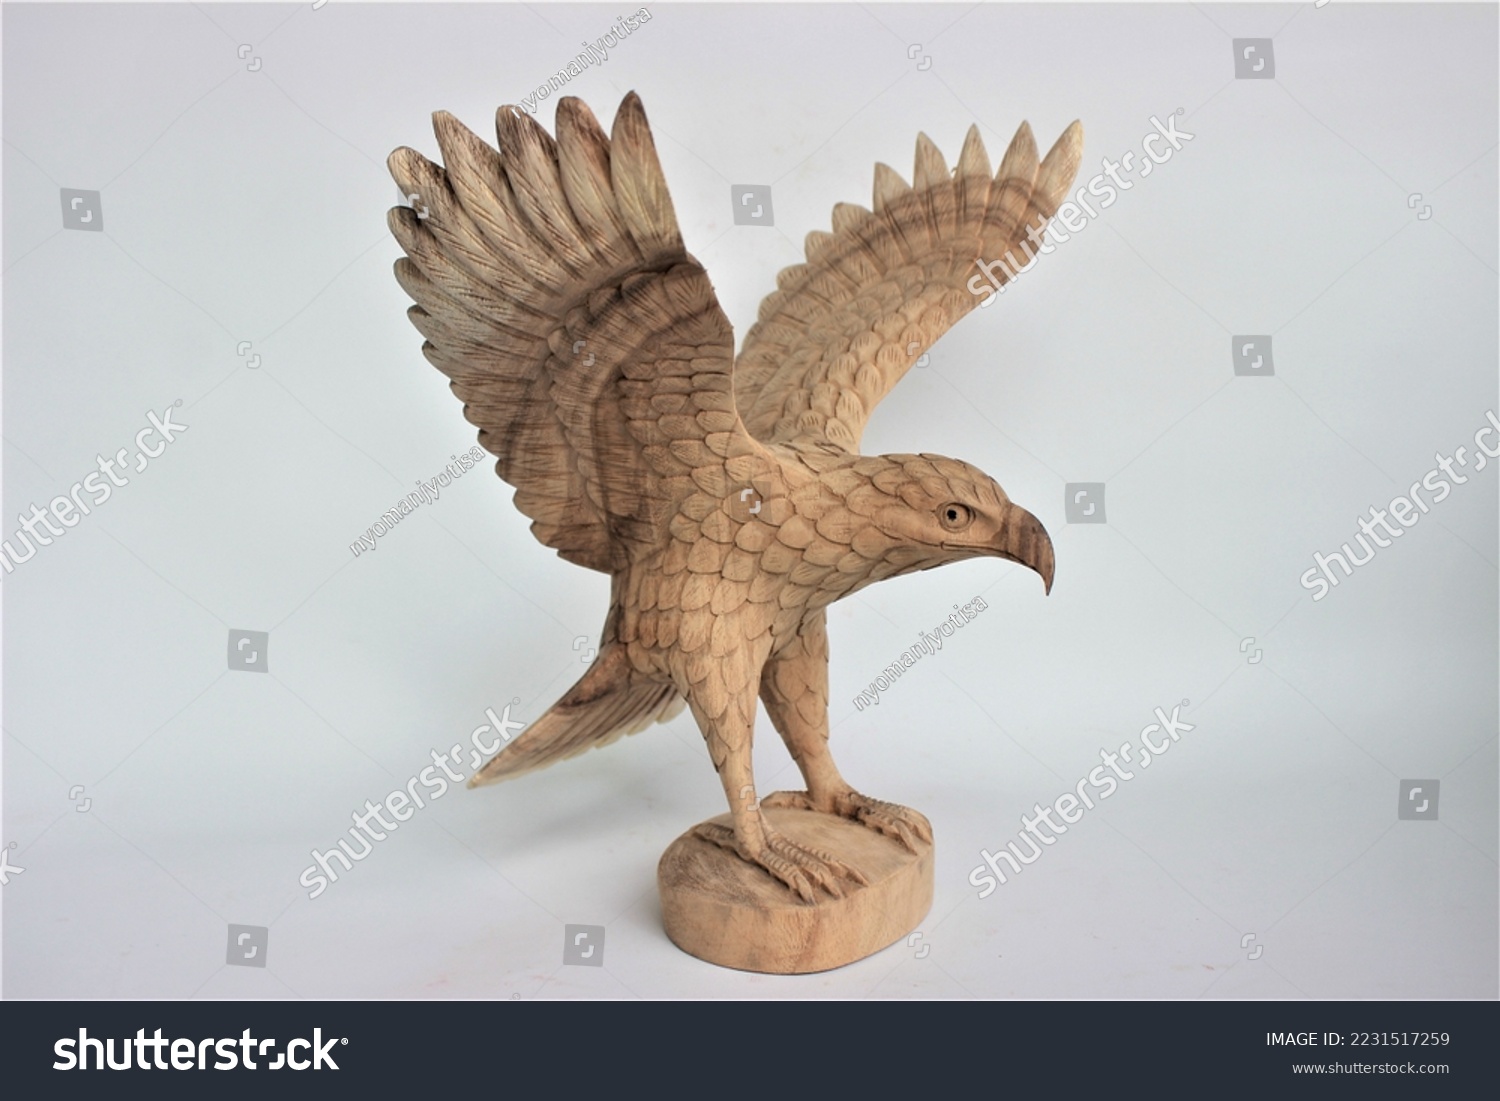 	
Balinese Handmade Eagle Wooden Sculpture Wood Carving, Sculpture, Art from Bali Indonesia #2231517259